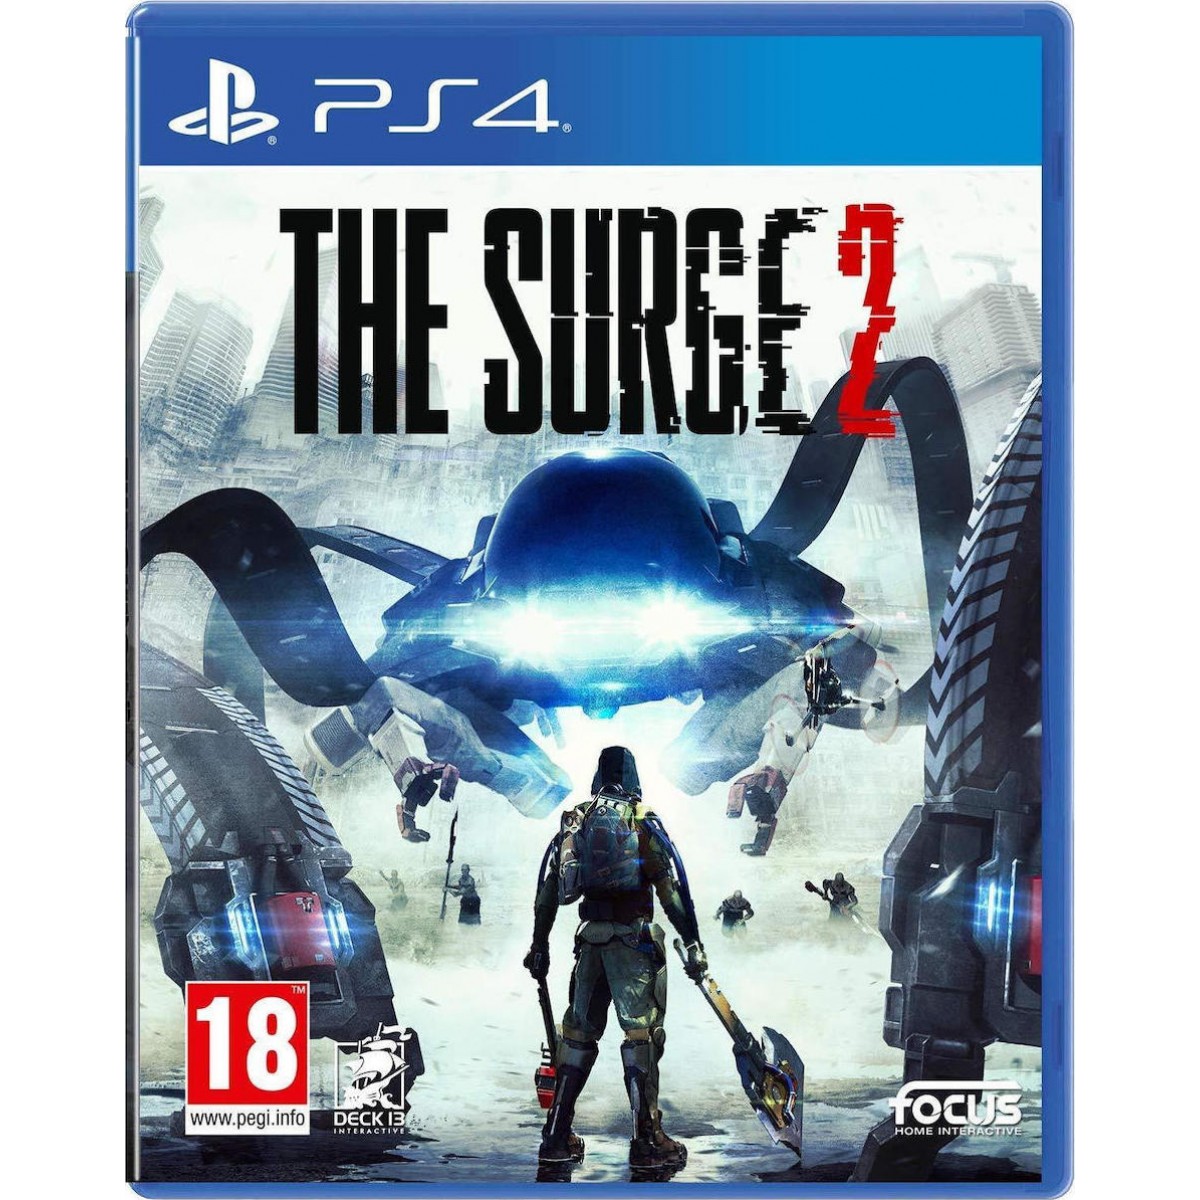 PS4 THE SURGE 2 GAME